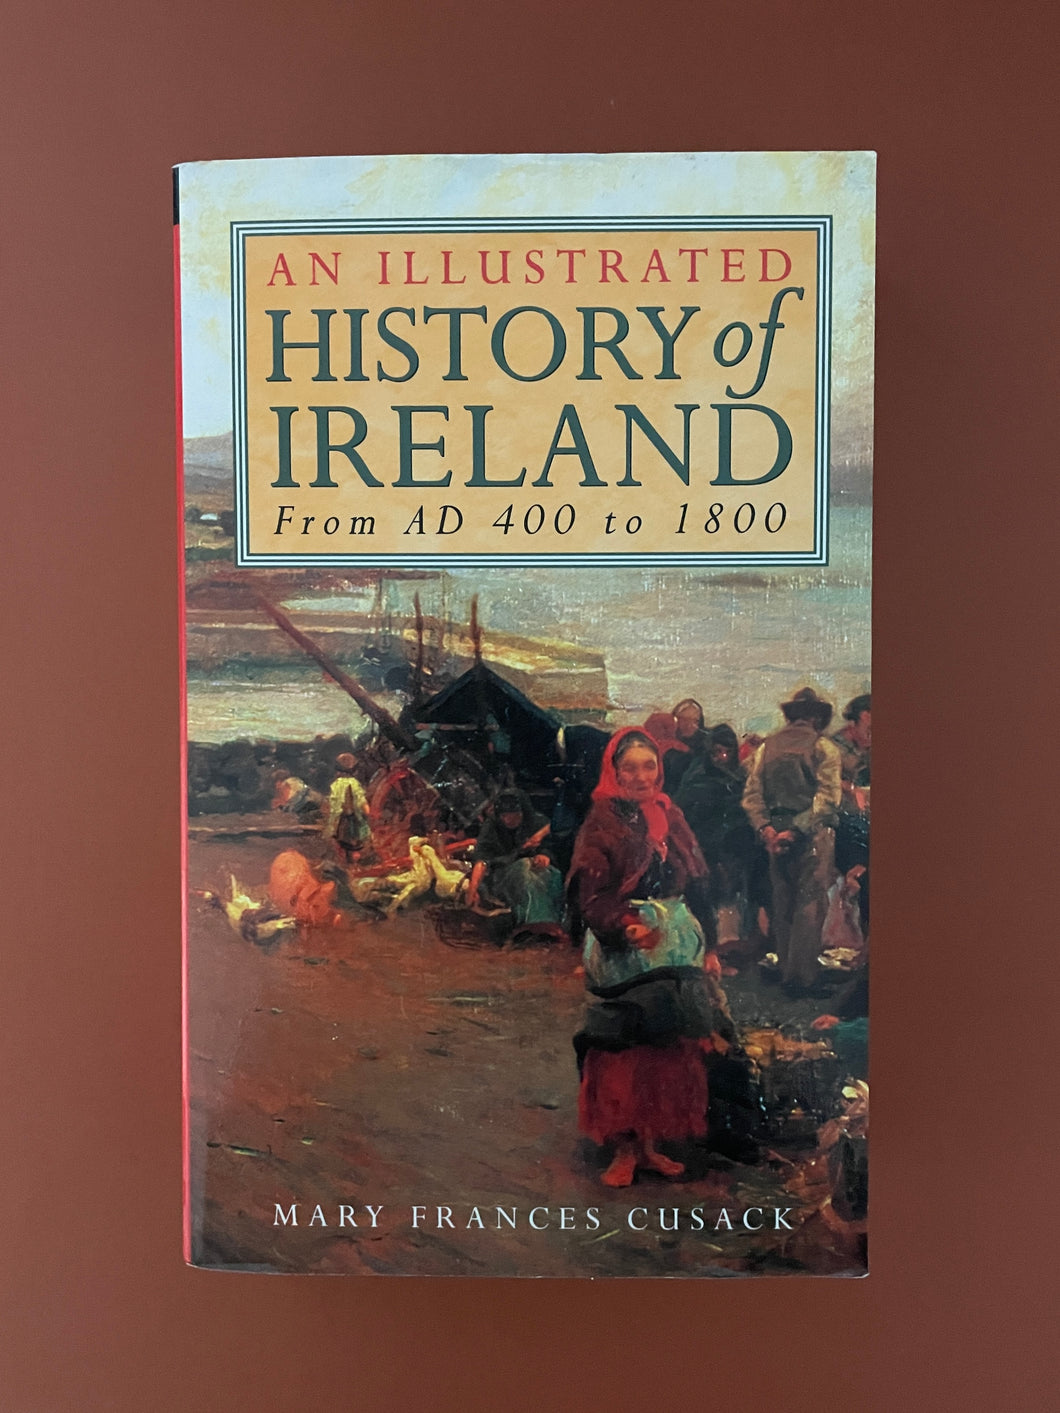 An Illustrated History of Ireland-From AD 400 to 1800 by Mary Frances Cusack: photo of the front cover which shows very minor scuff marks along the edges, and very minor scratching.